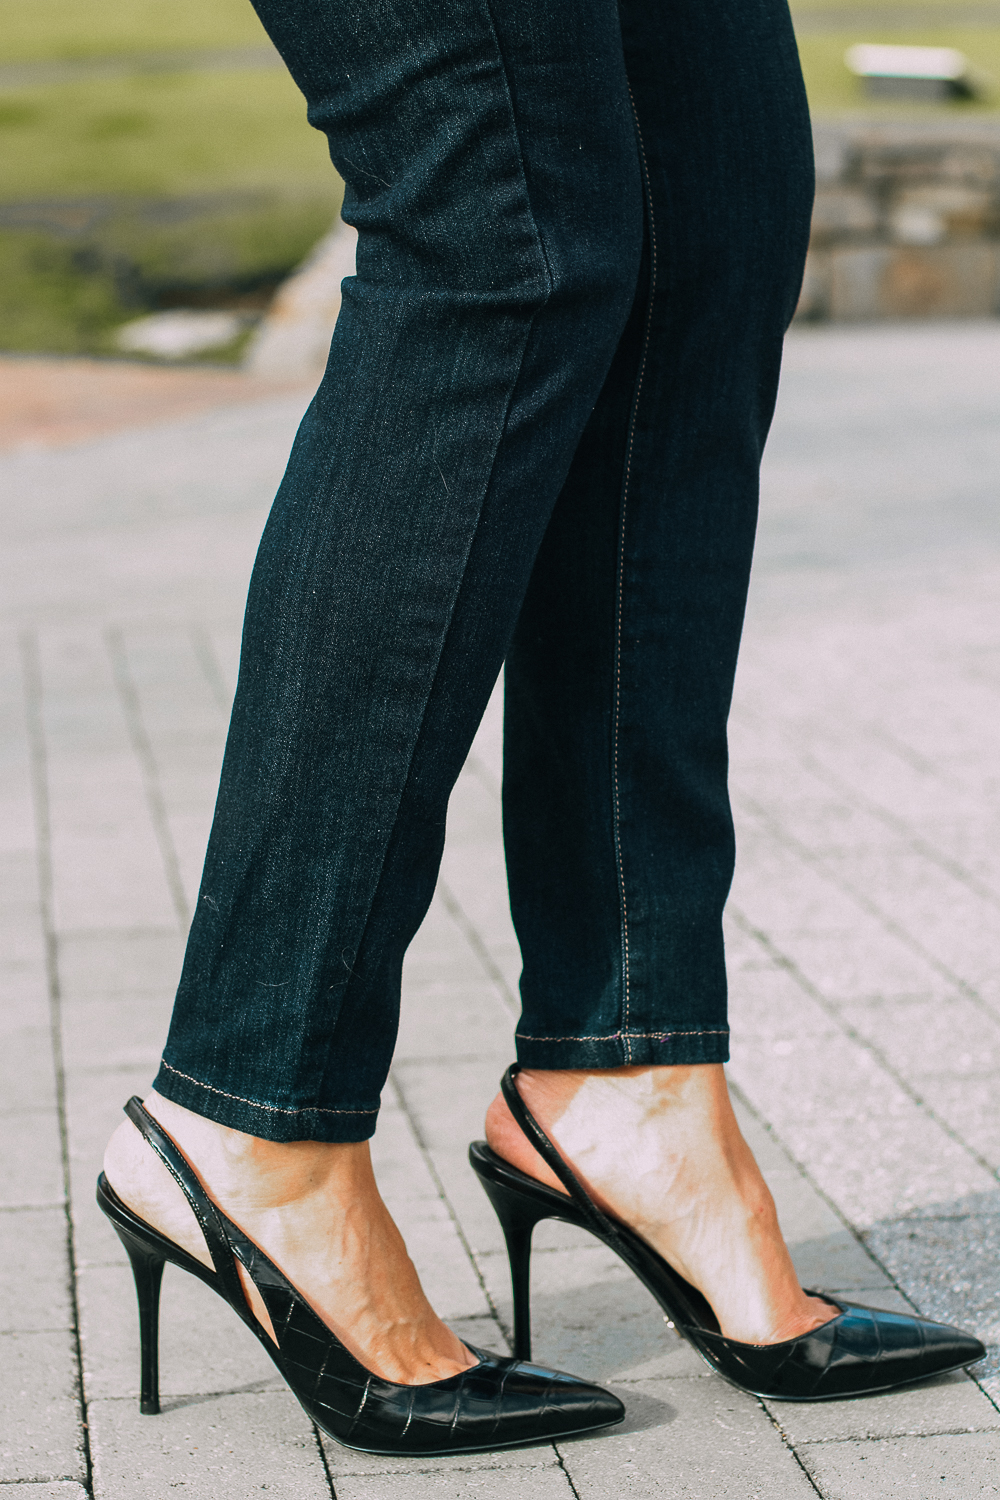 Best Jeans for Curves by Not Your Daughter's Jeans or NYDJ paired with black of shoulder dolman top, Quay aviator sunglasses, gold earrings on fashion blogger over 40, Erin Busbee of busbee style, five shoes you need this fall